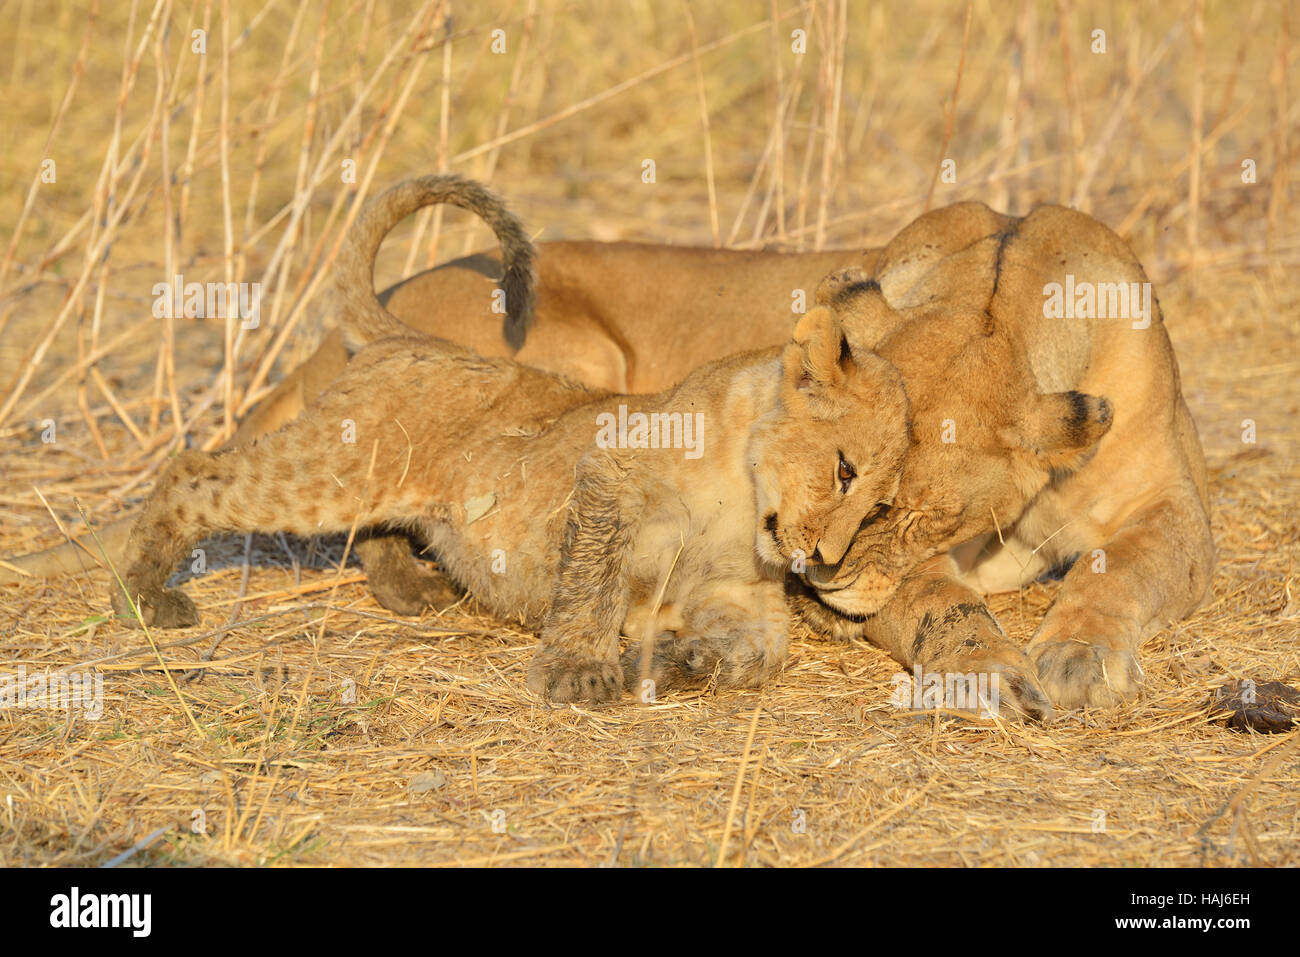 Lioness and cub Stock Photo